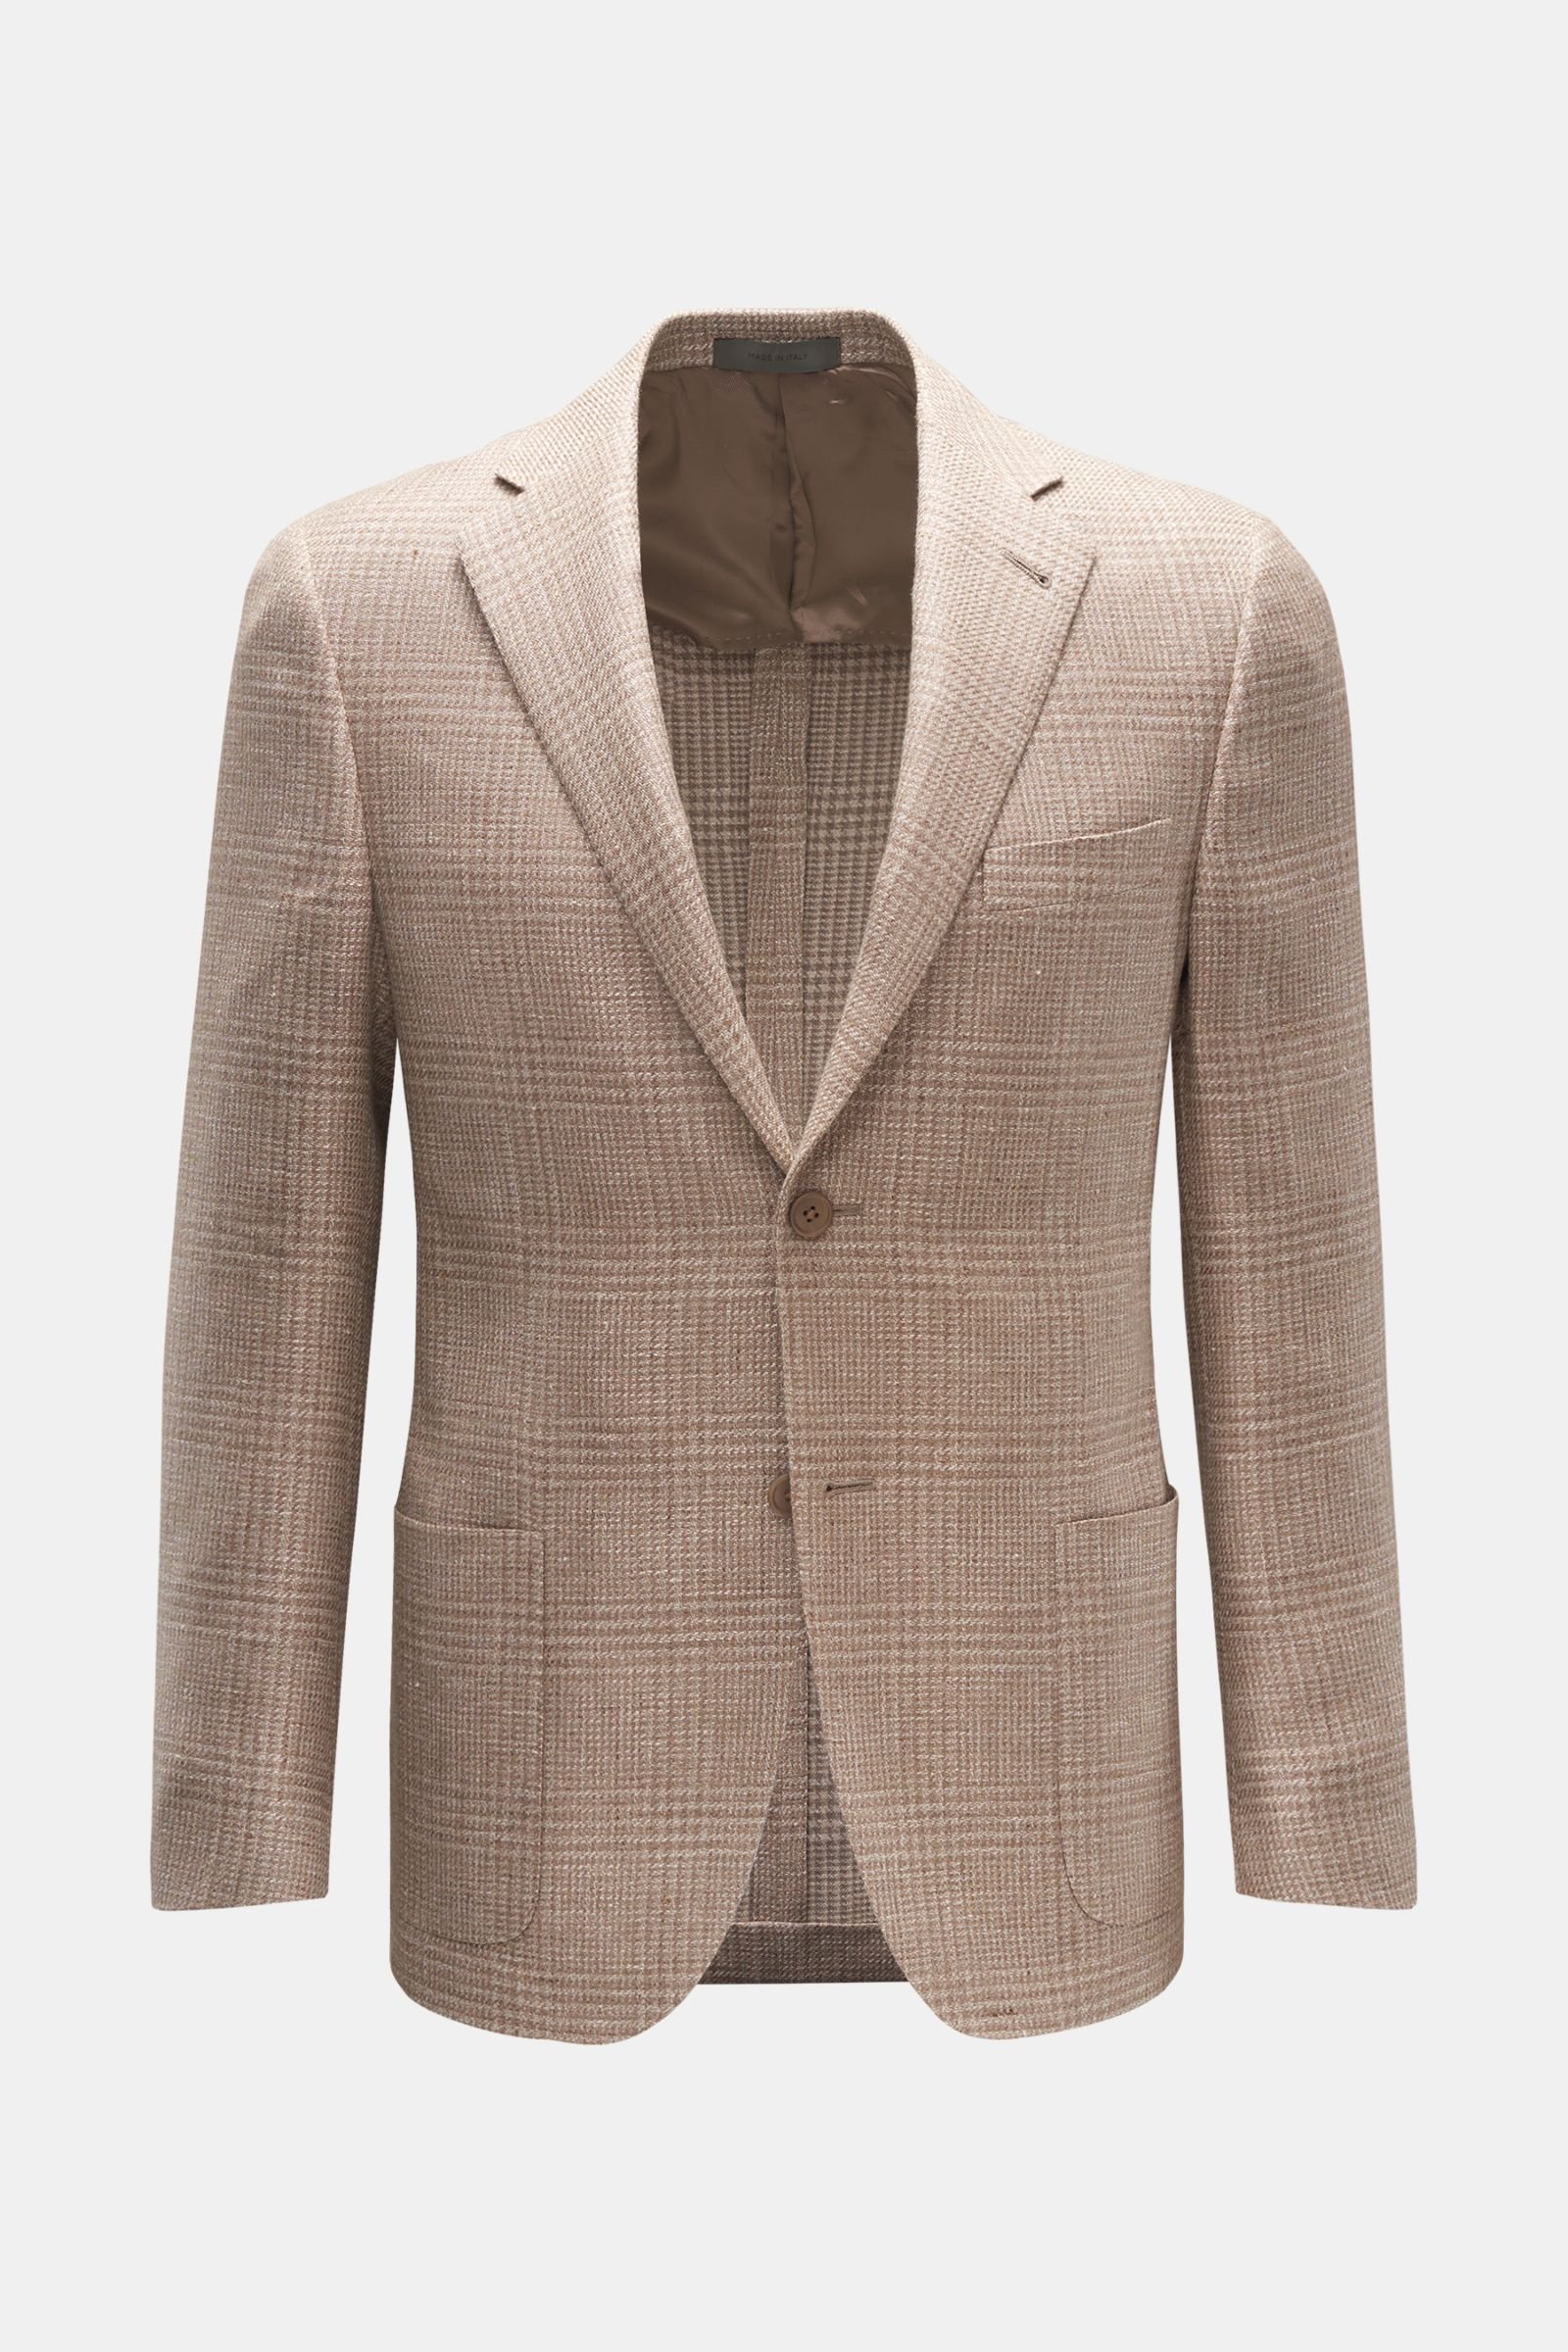 Smart-casual jacket beige/white checked